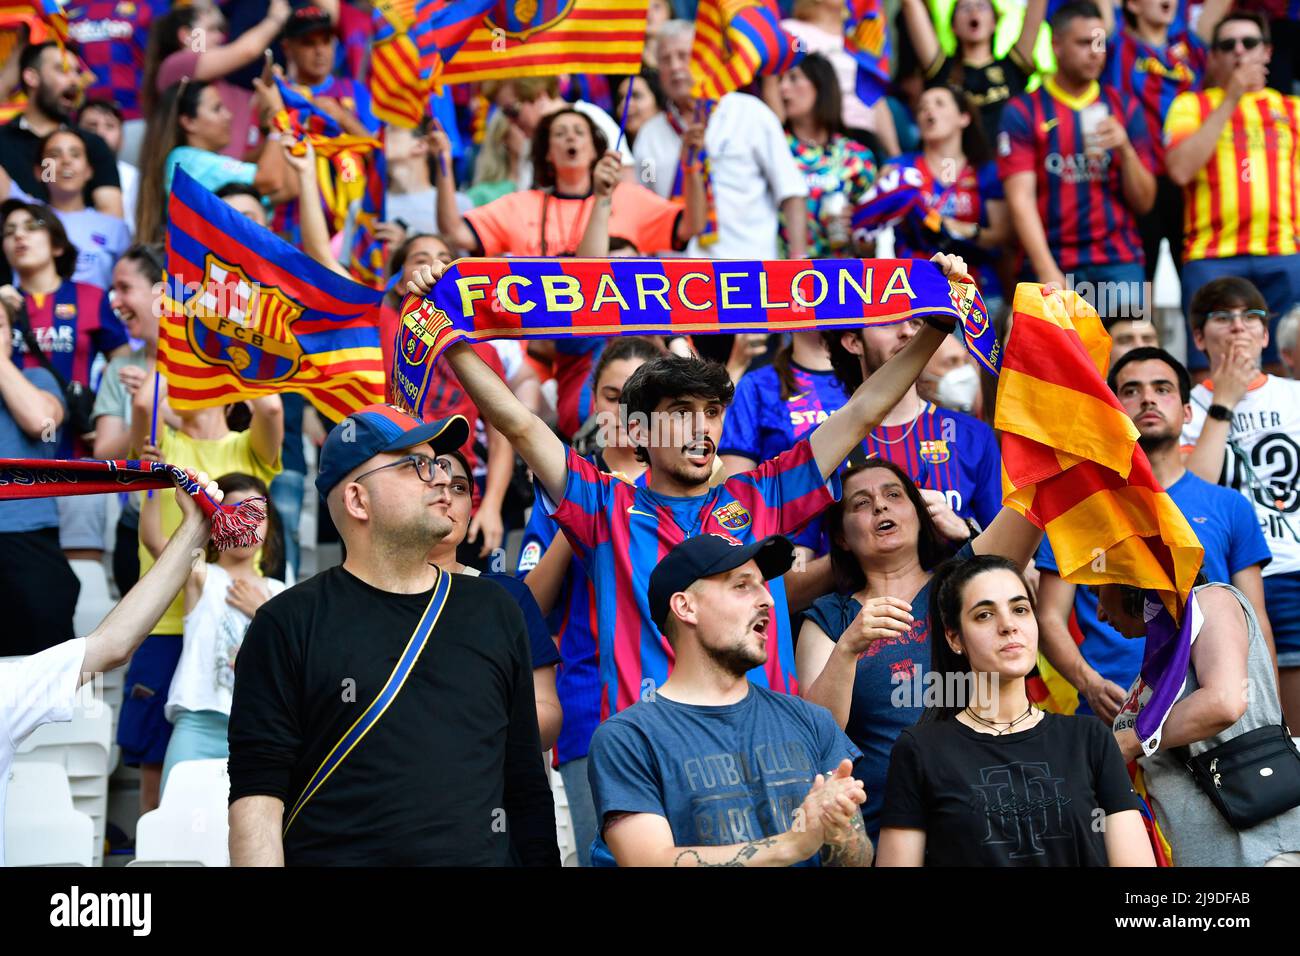 Turin, Italy. 21st, May 2022. Football fans of FC Barcelona seen on the stands during the UEFA Women’s Champions League final between Barcelona and Olympique Lyon at Juventus Stadium in Turin. (Photo credit: Gonzales Photo - Tommaso Fimiano). Stock Photo